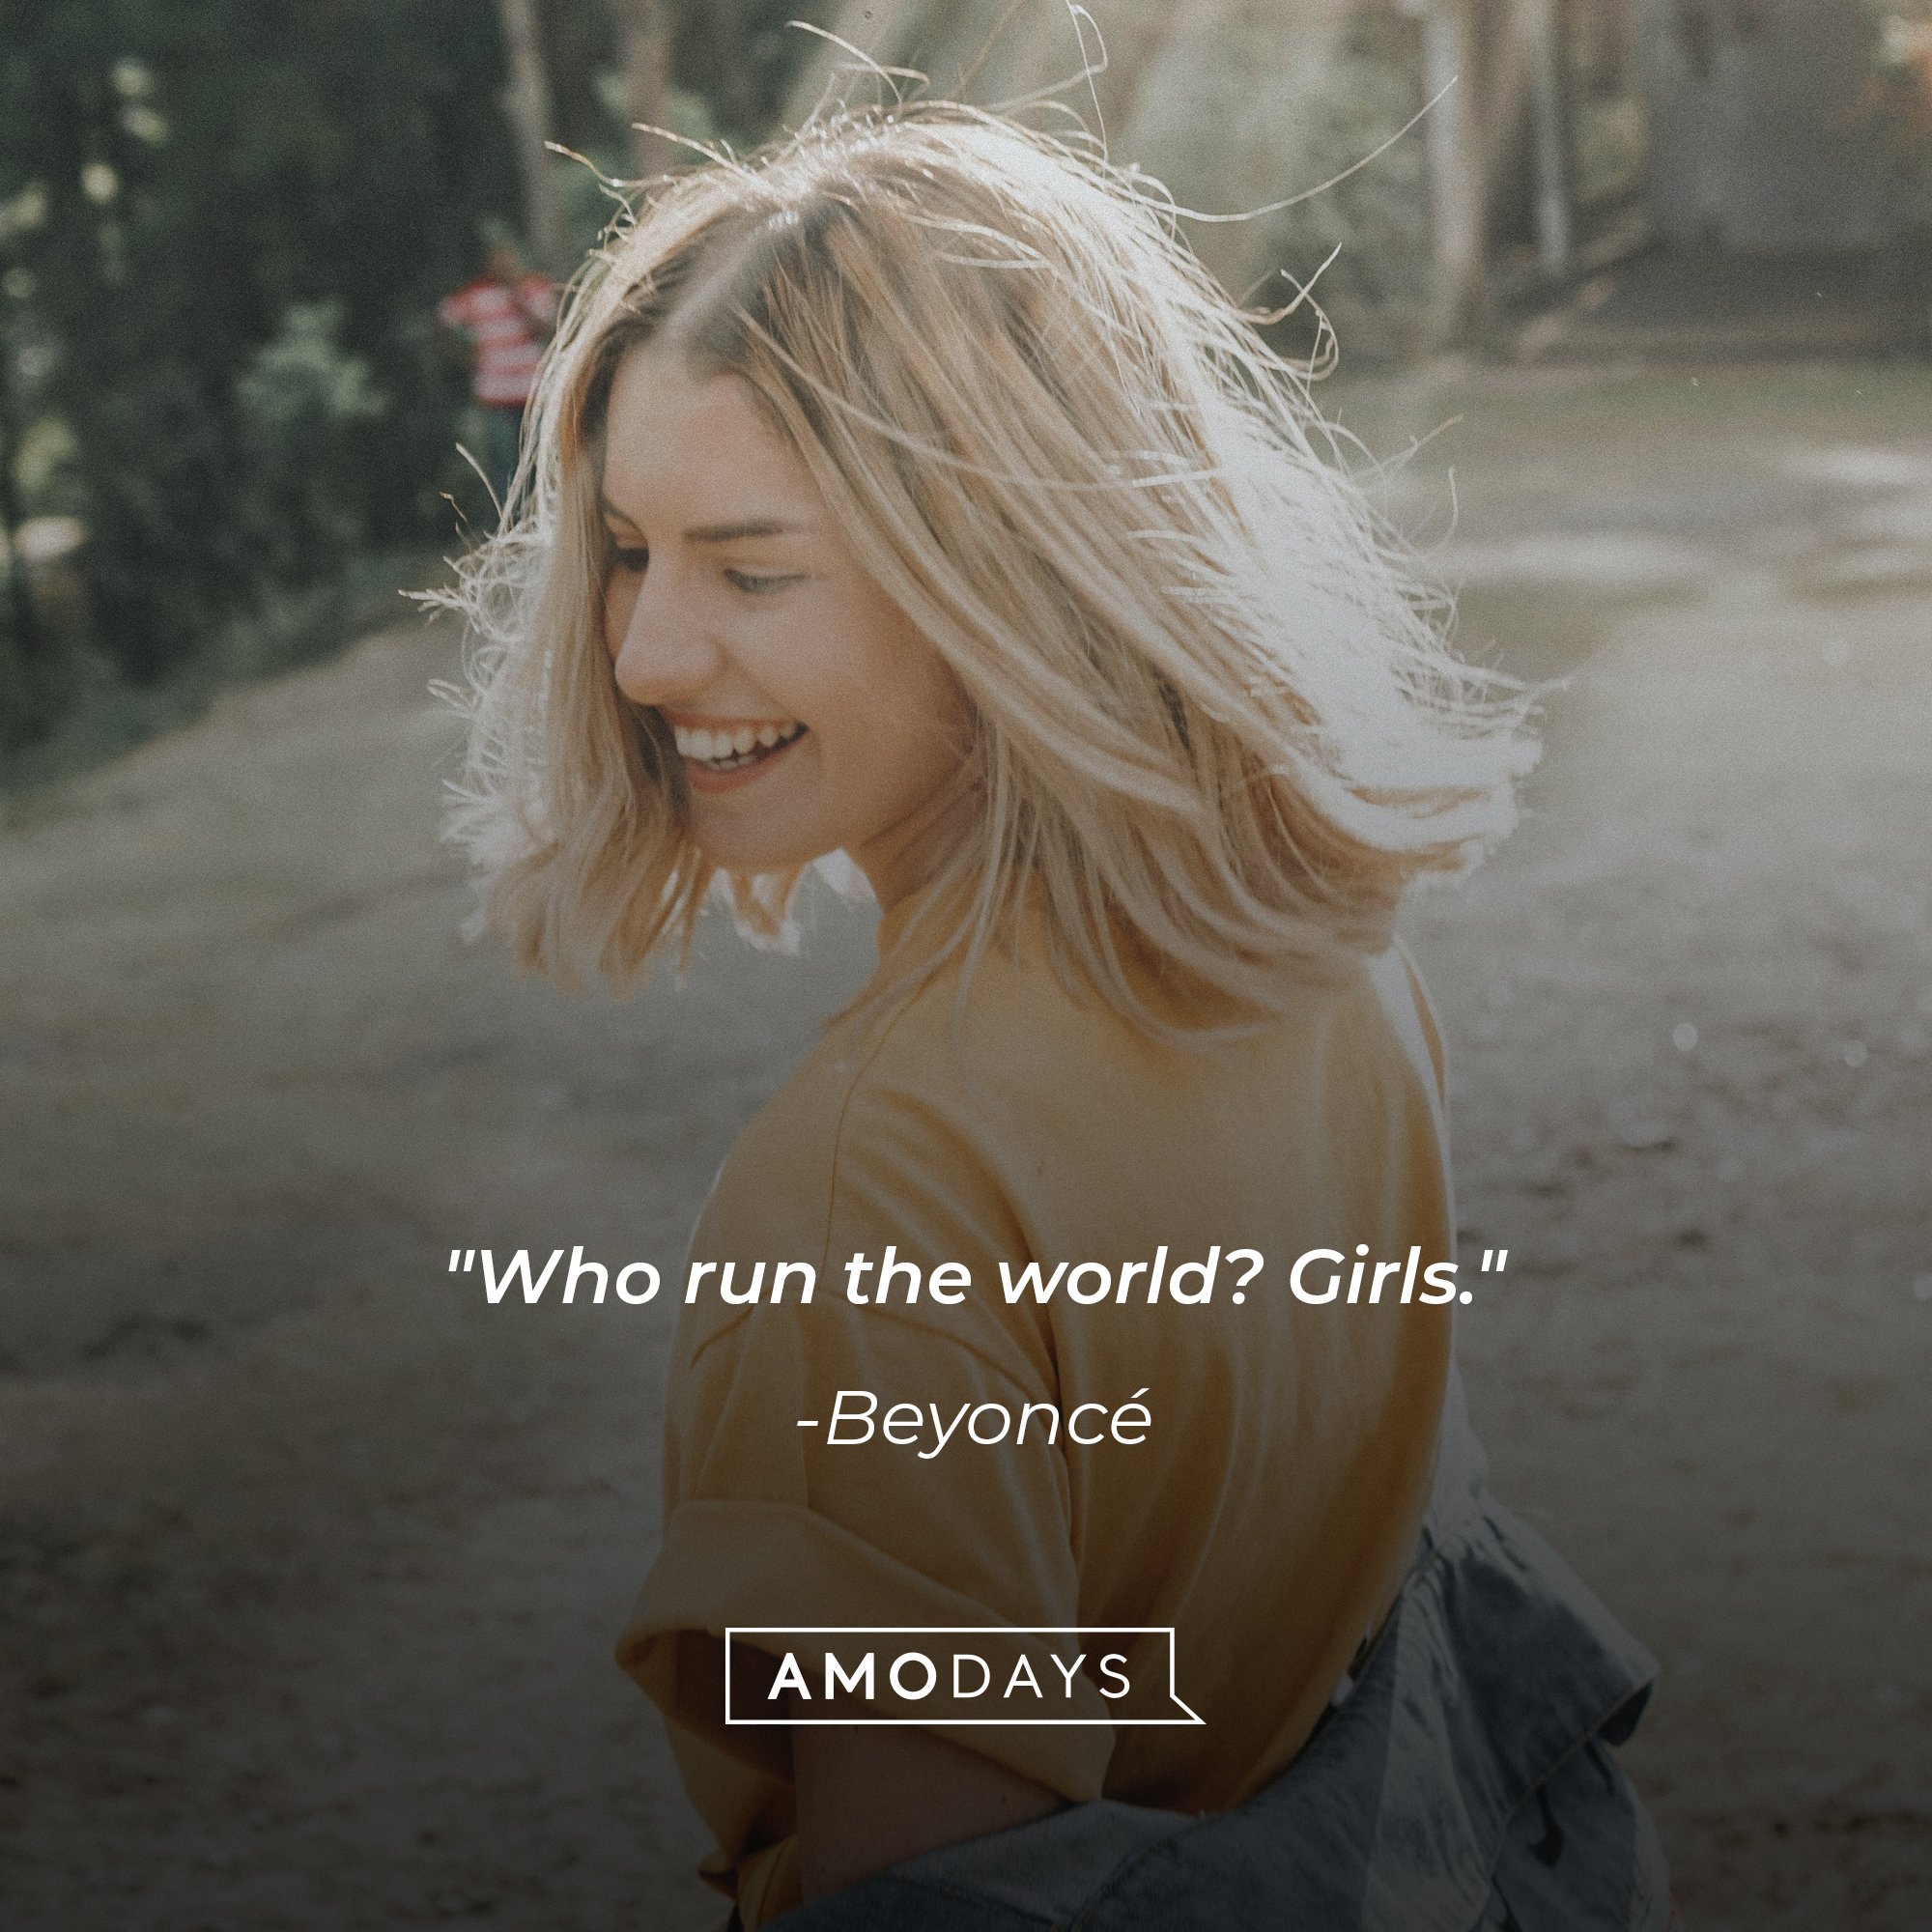 Beyoncé’s quote: "Who run the world? Girls." | Image: AmoDays